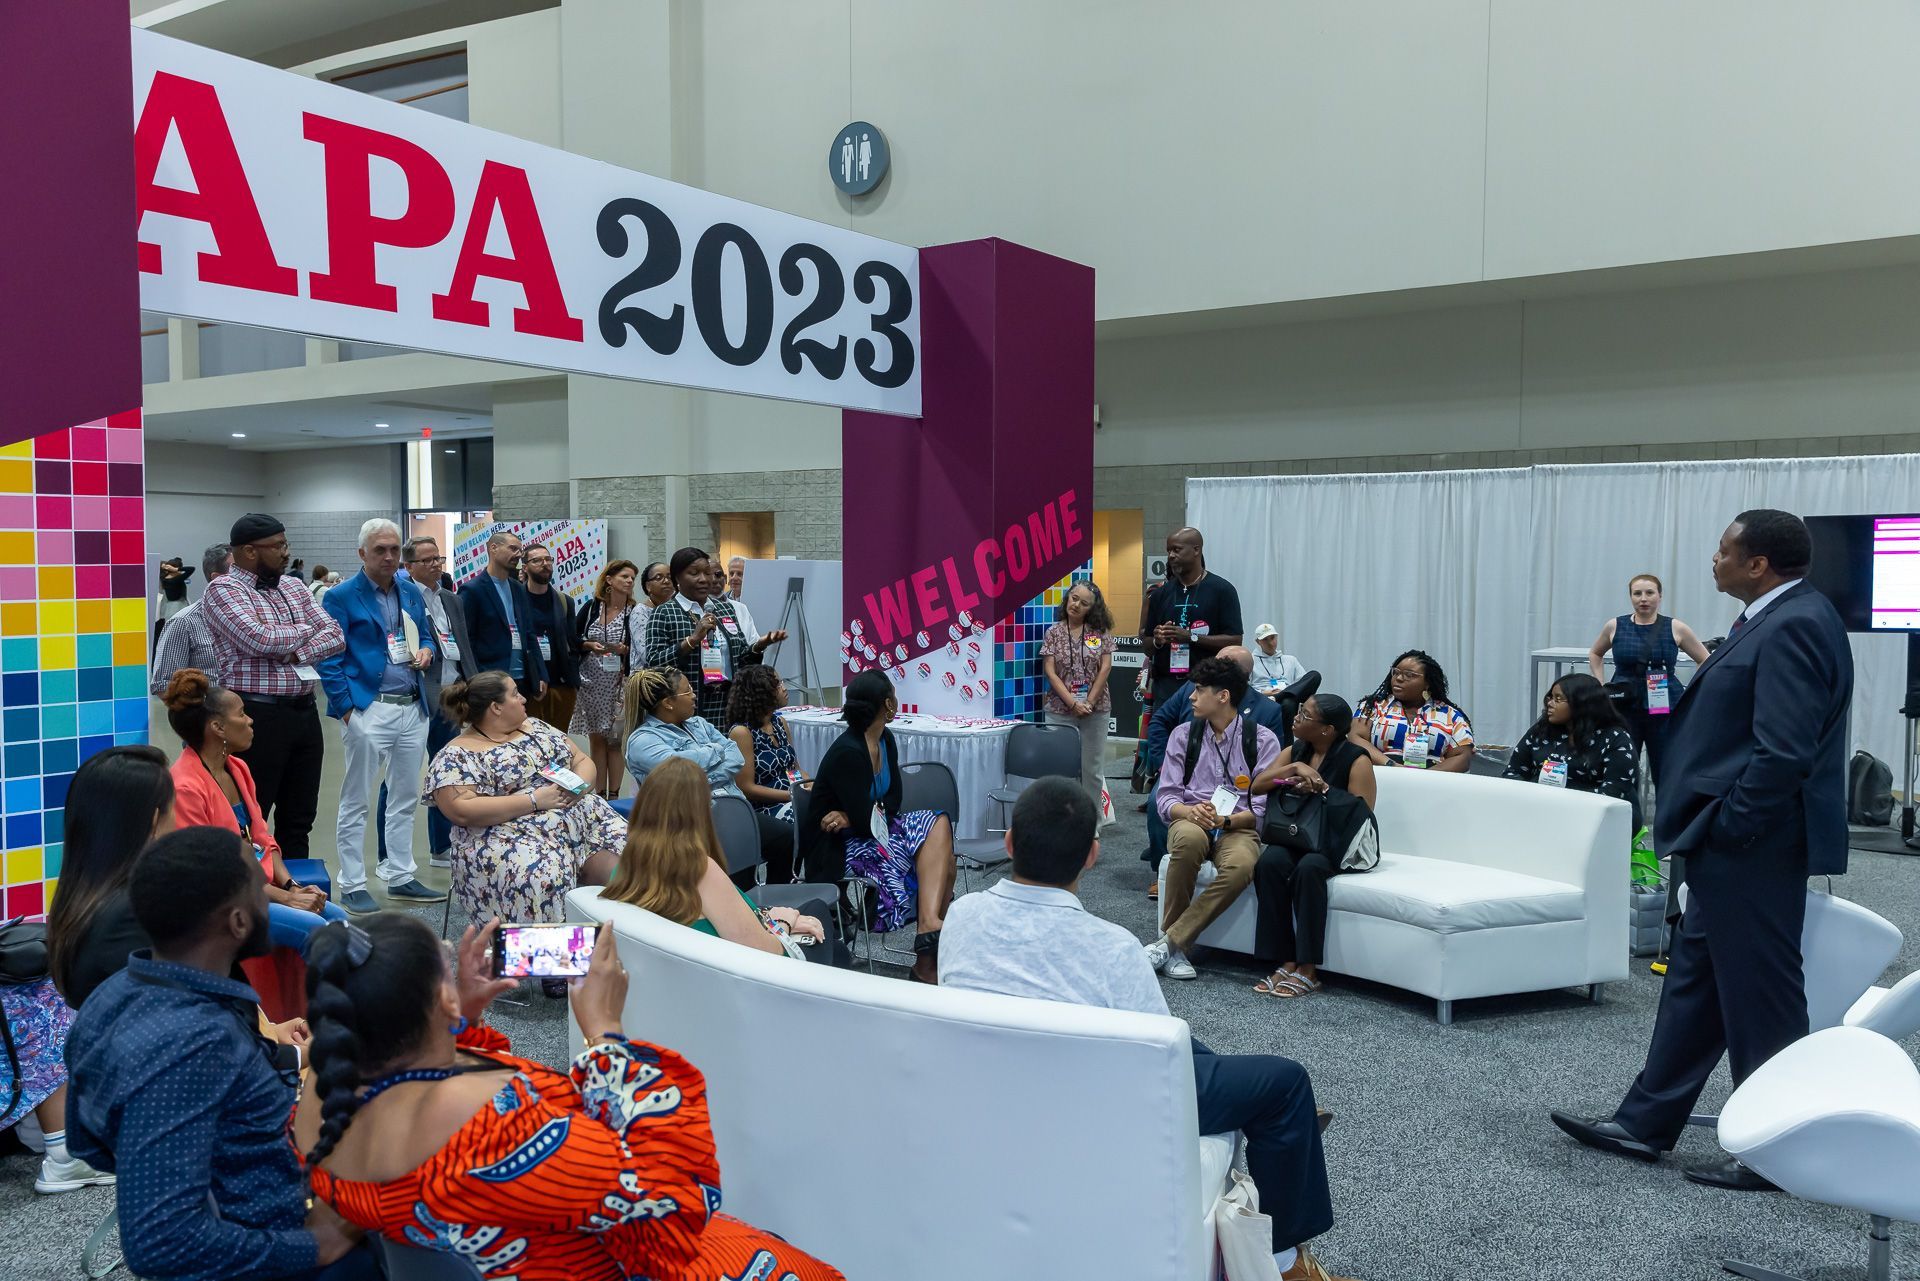 A group of people are sitting in a room under a sign that says apa 2023.